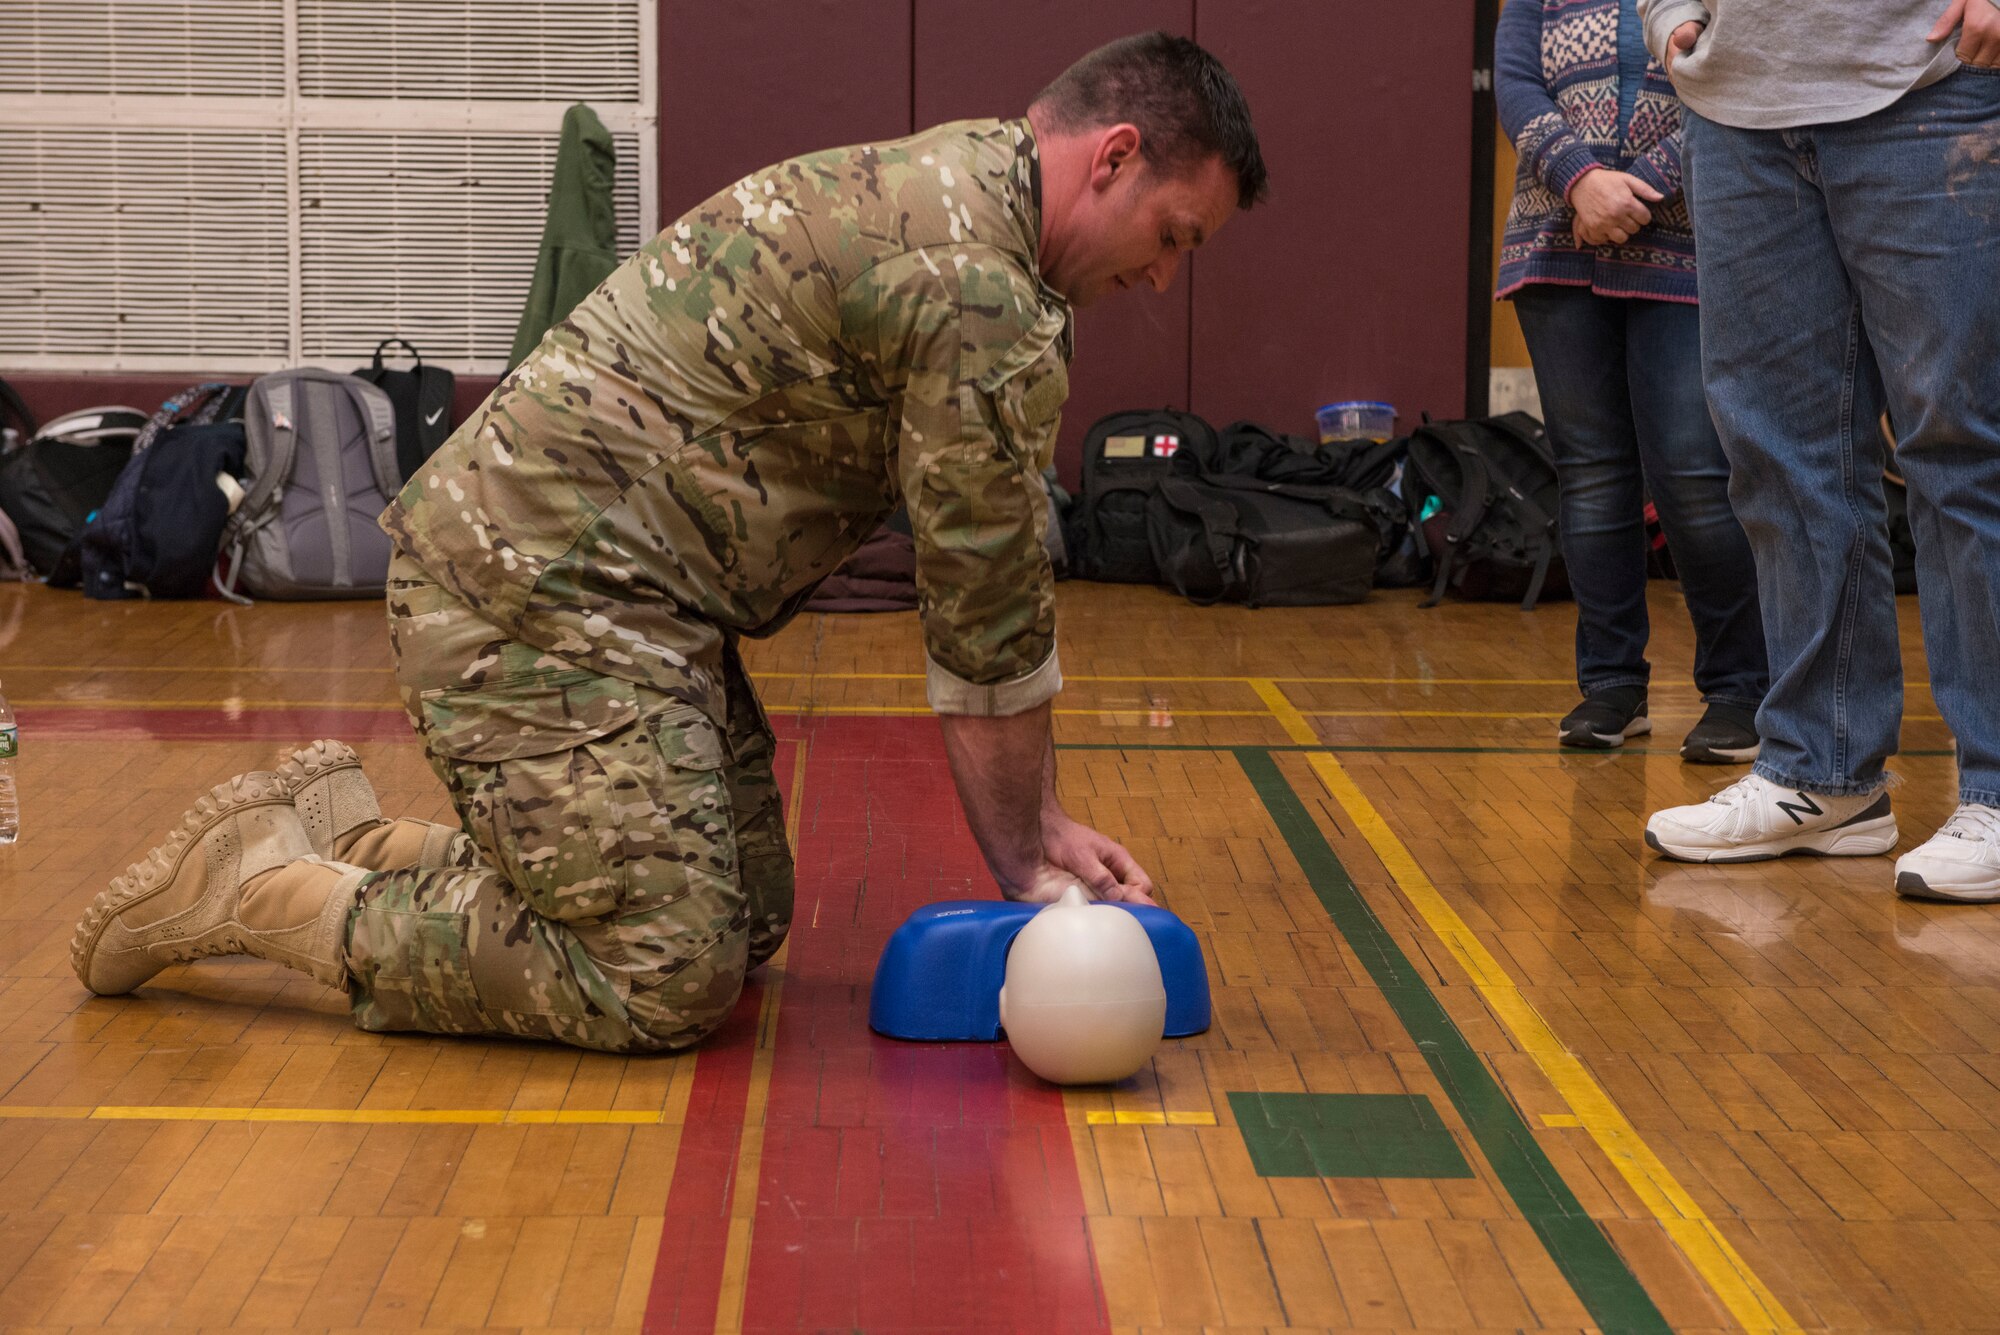 Master Sgt. Darrel Hanrahan, an Aerospace Medical Technician assigned to the 103rd Medical Group, demonstrates chest compressions on a CPR manikin during a CPR class at Torrington High School,  Torrington, Conn., March 22. Airmen from the 103rd Medical Group volunteered to help students meet requirements for their physical education class. (U.S. Air National Guard photo by Staff Sgt. Steven Tucker)